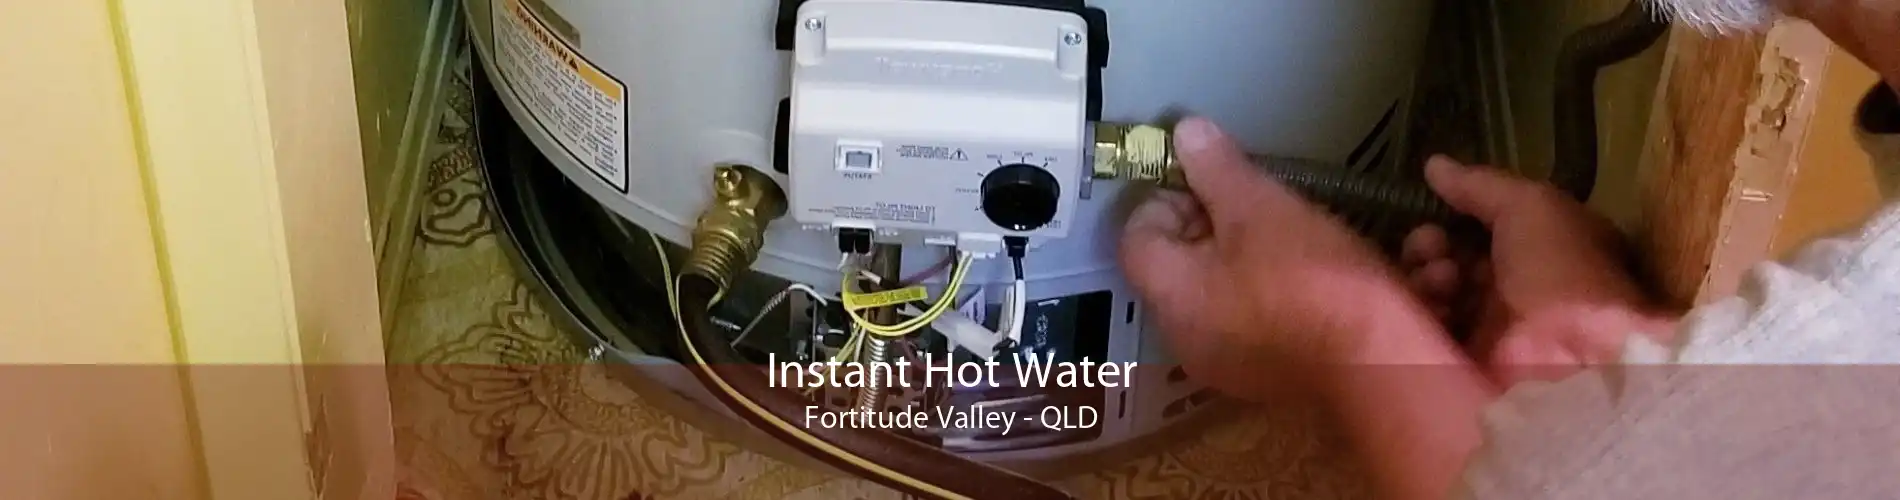 Instant Hot Water Fortitude Valley - QLD